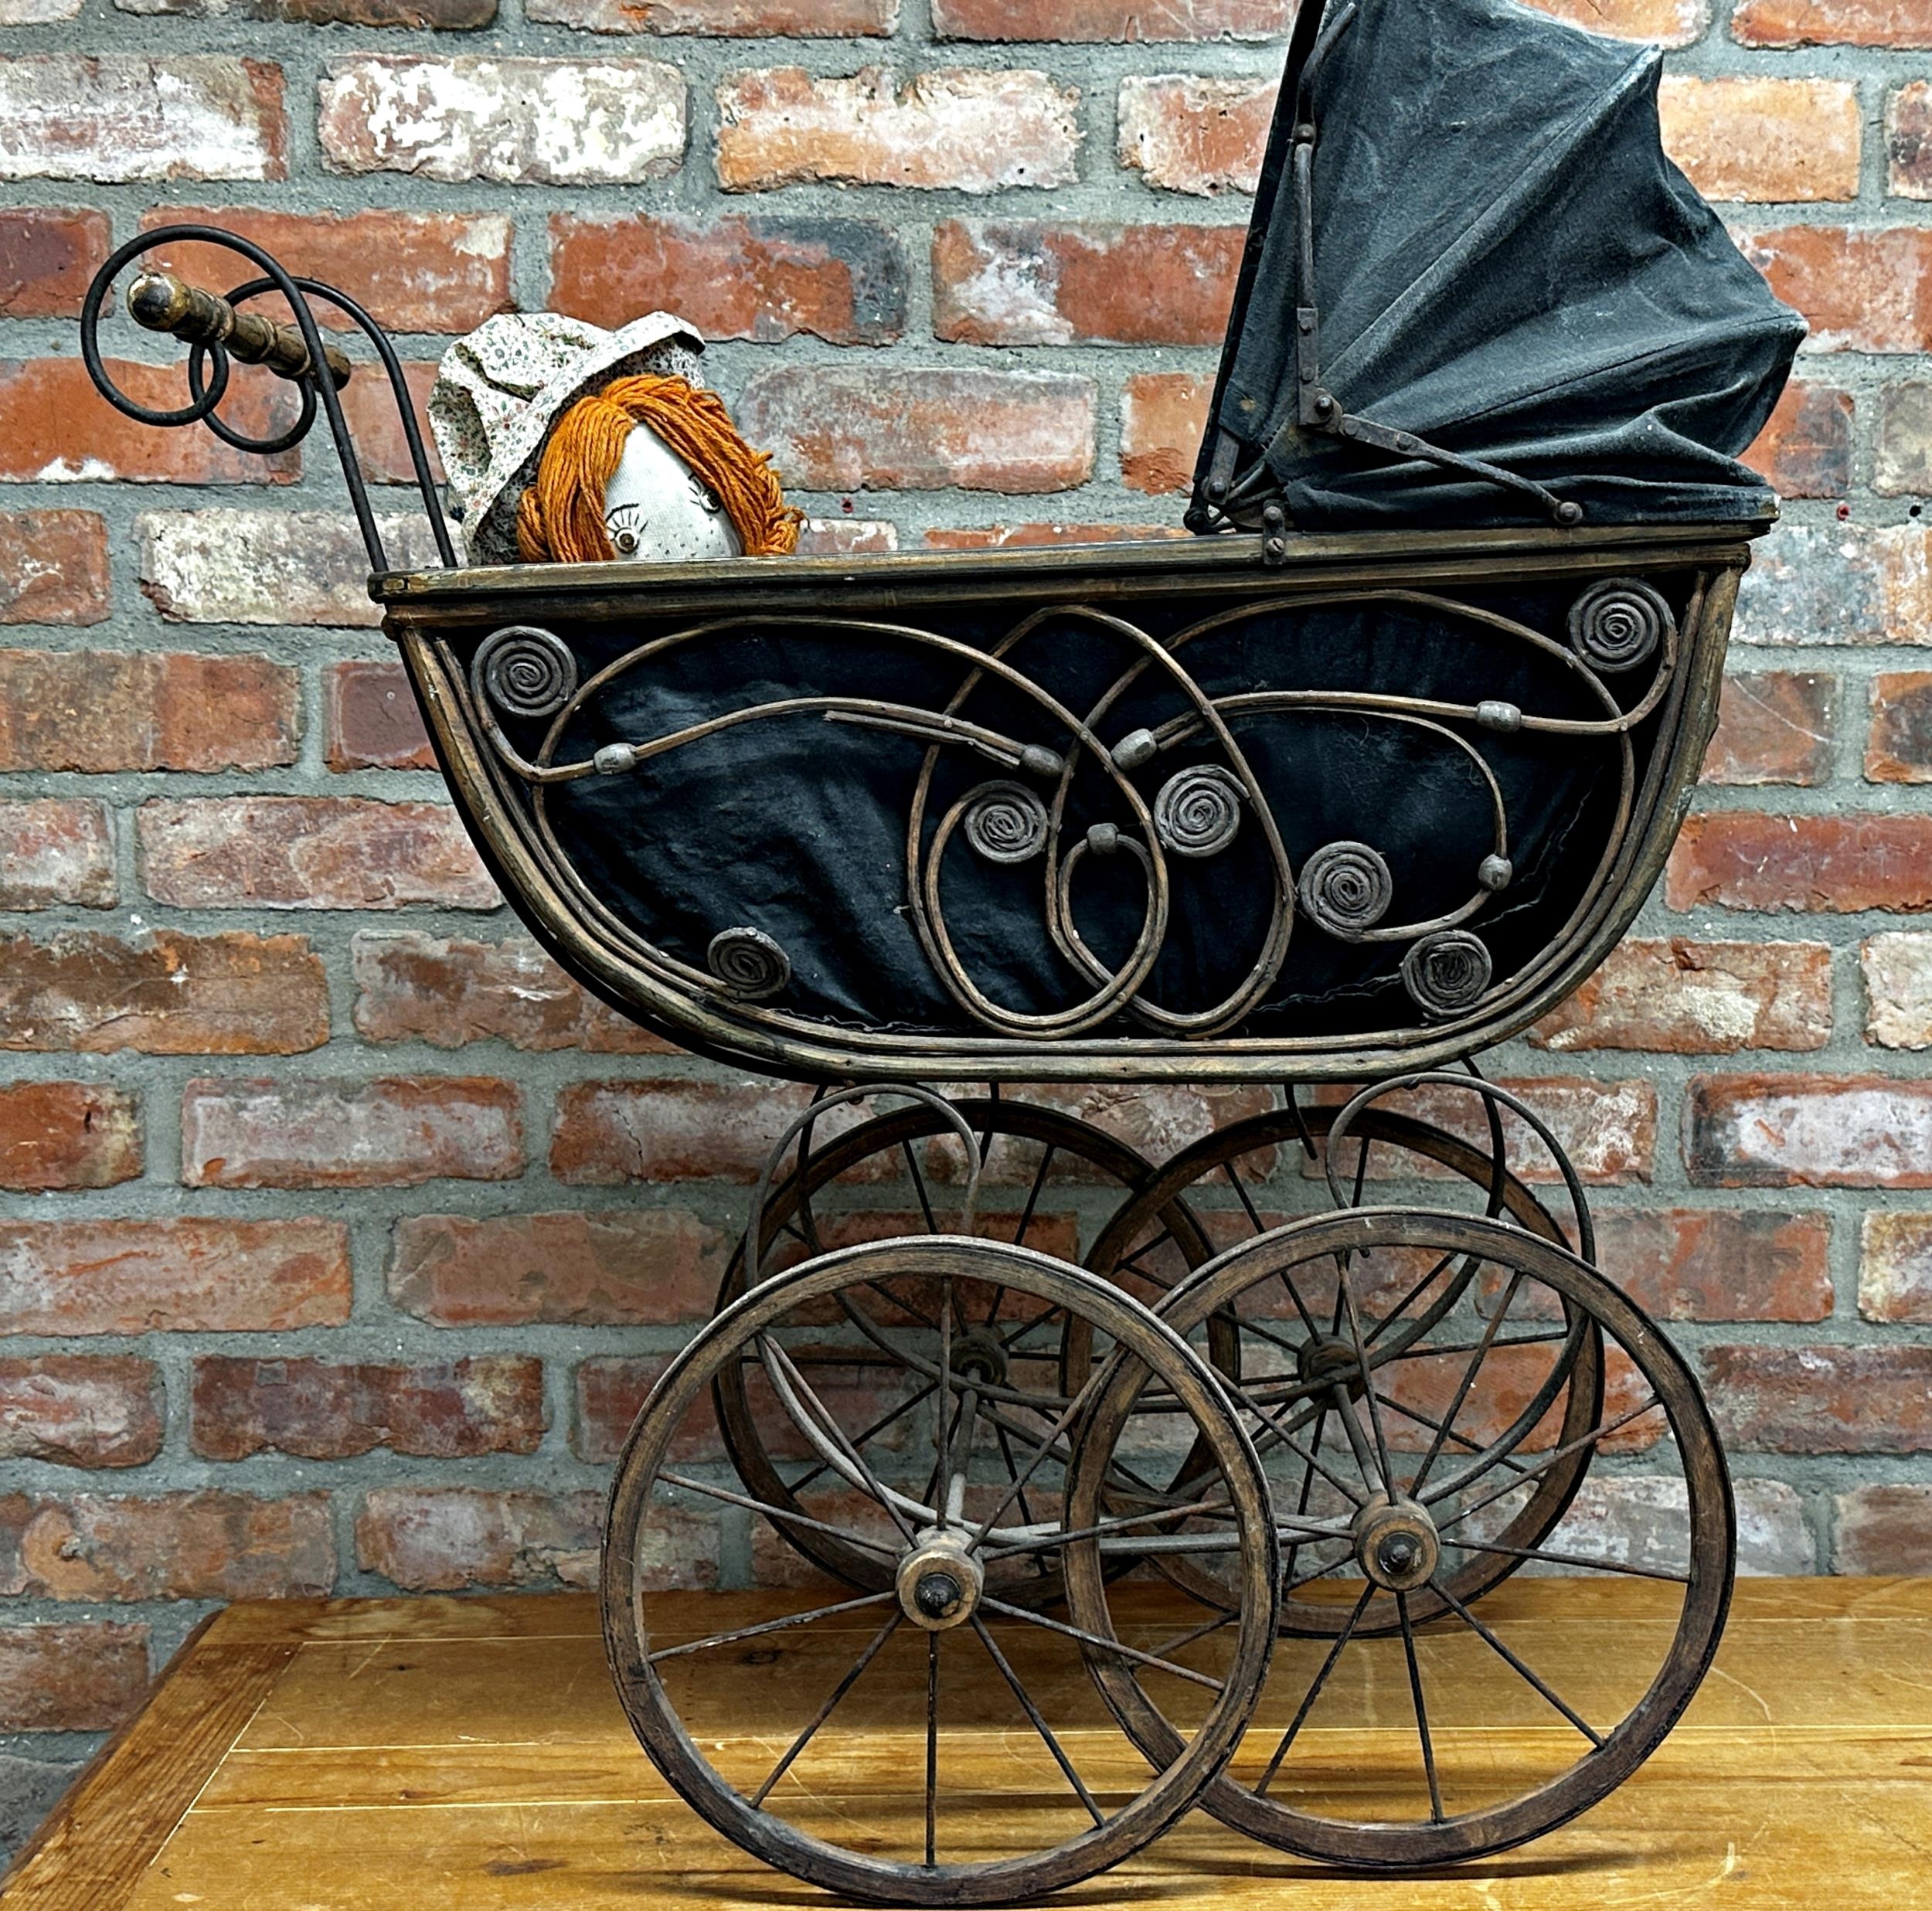 Antique wicker pram with pierced scrolling detail and fabric hood, 88cm high